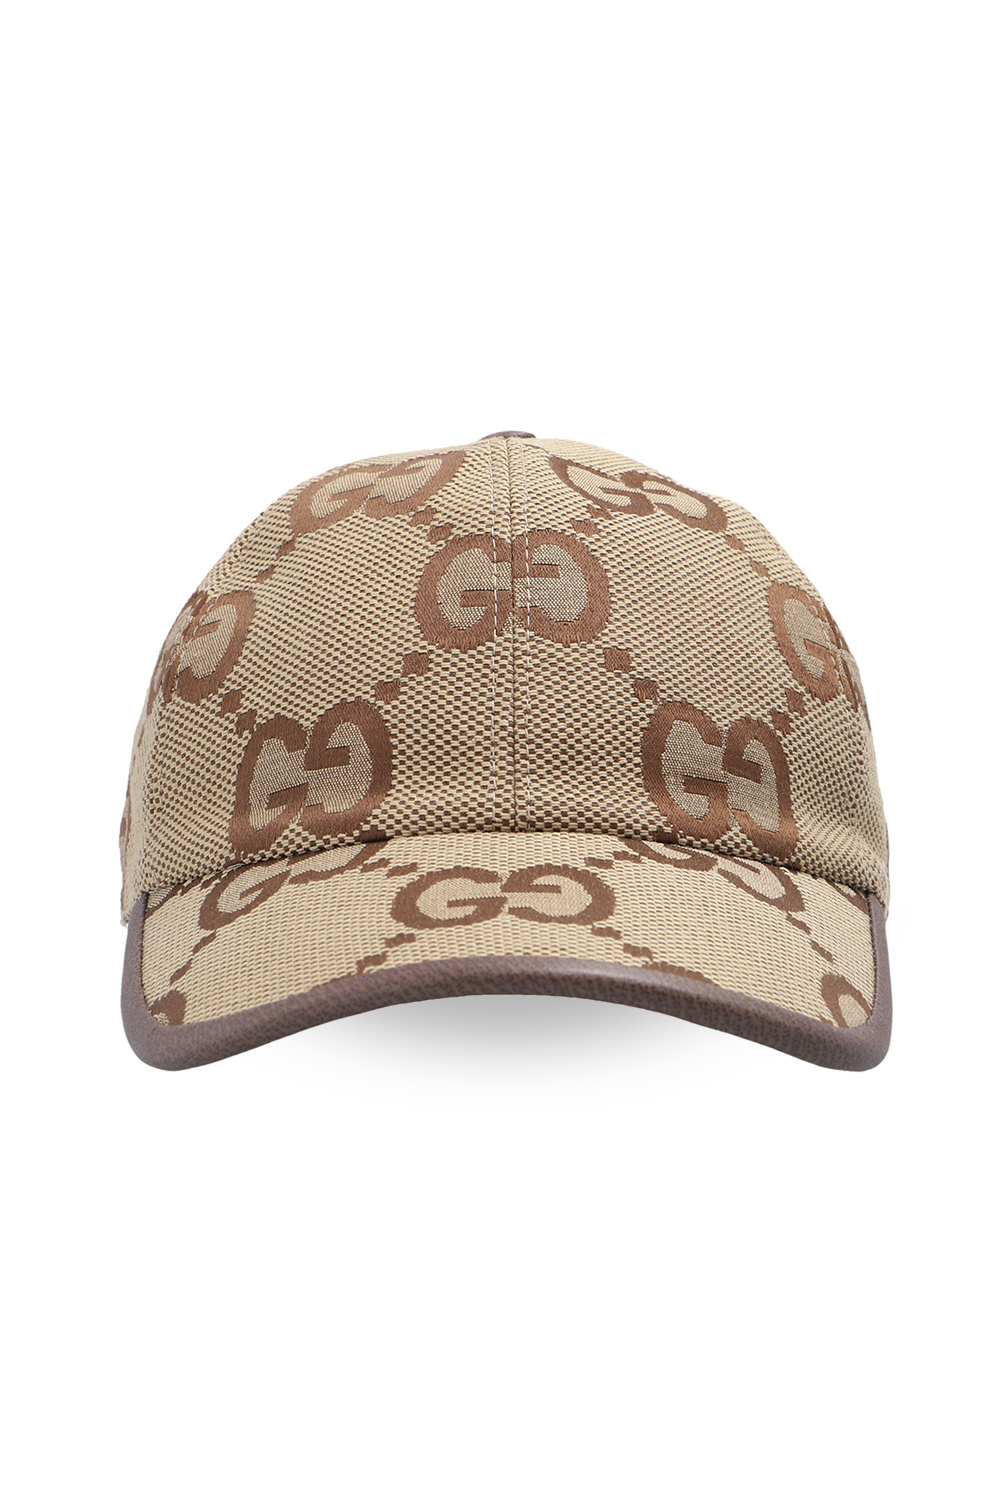 FREE ACCESSORIES! HOW TO GET Pink GG Baseball Hat & Gucci Hair